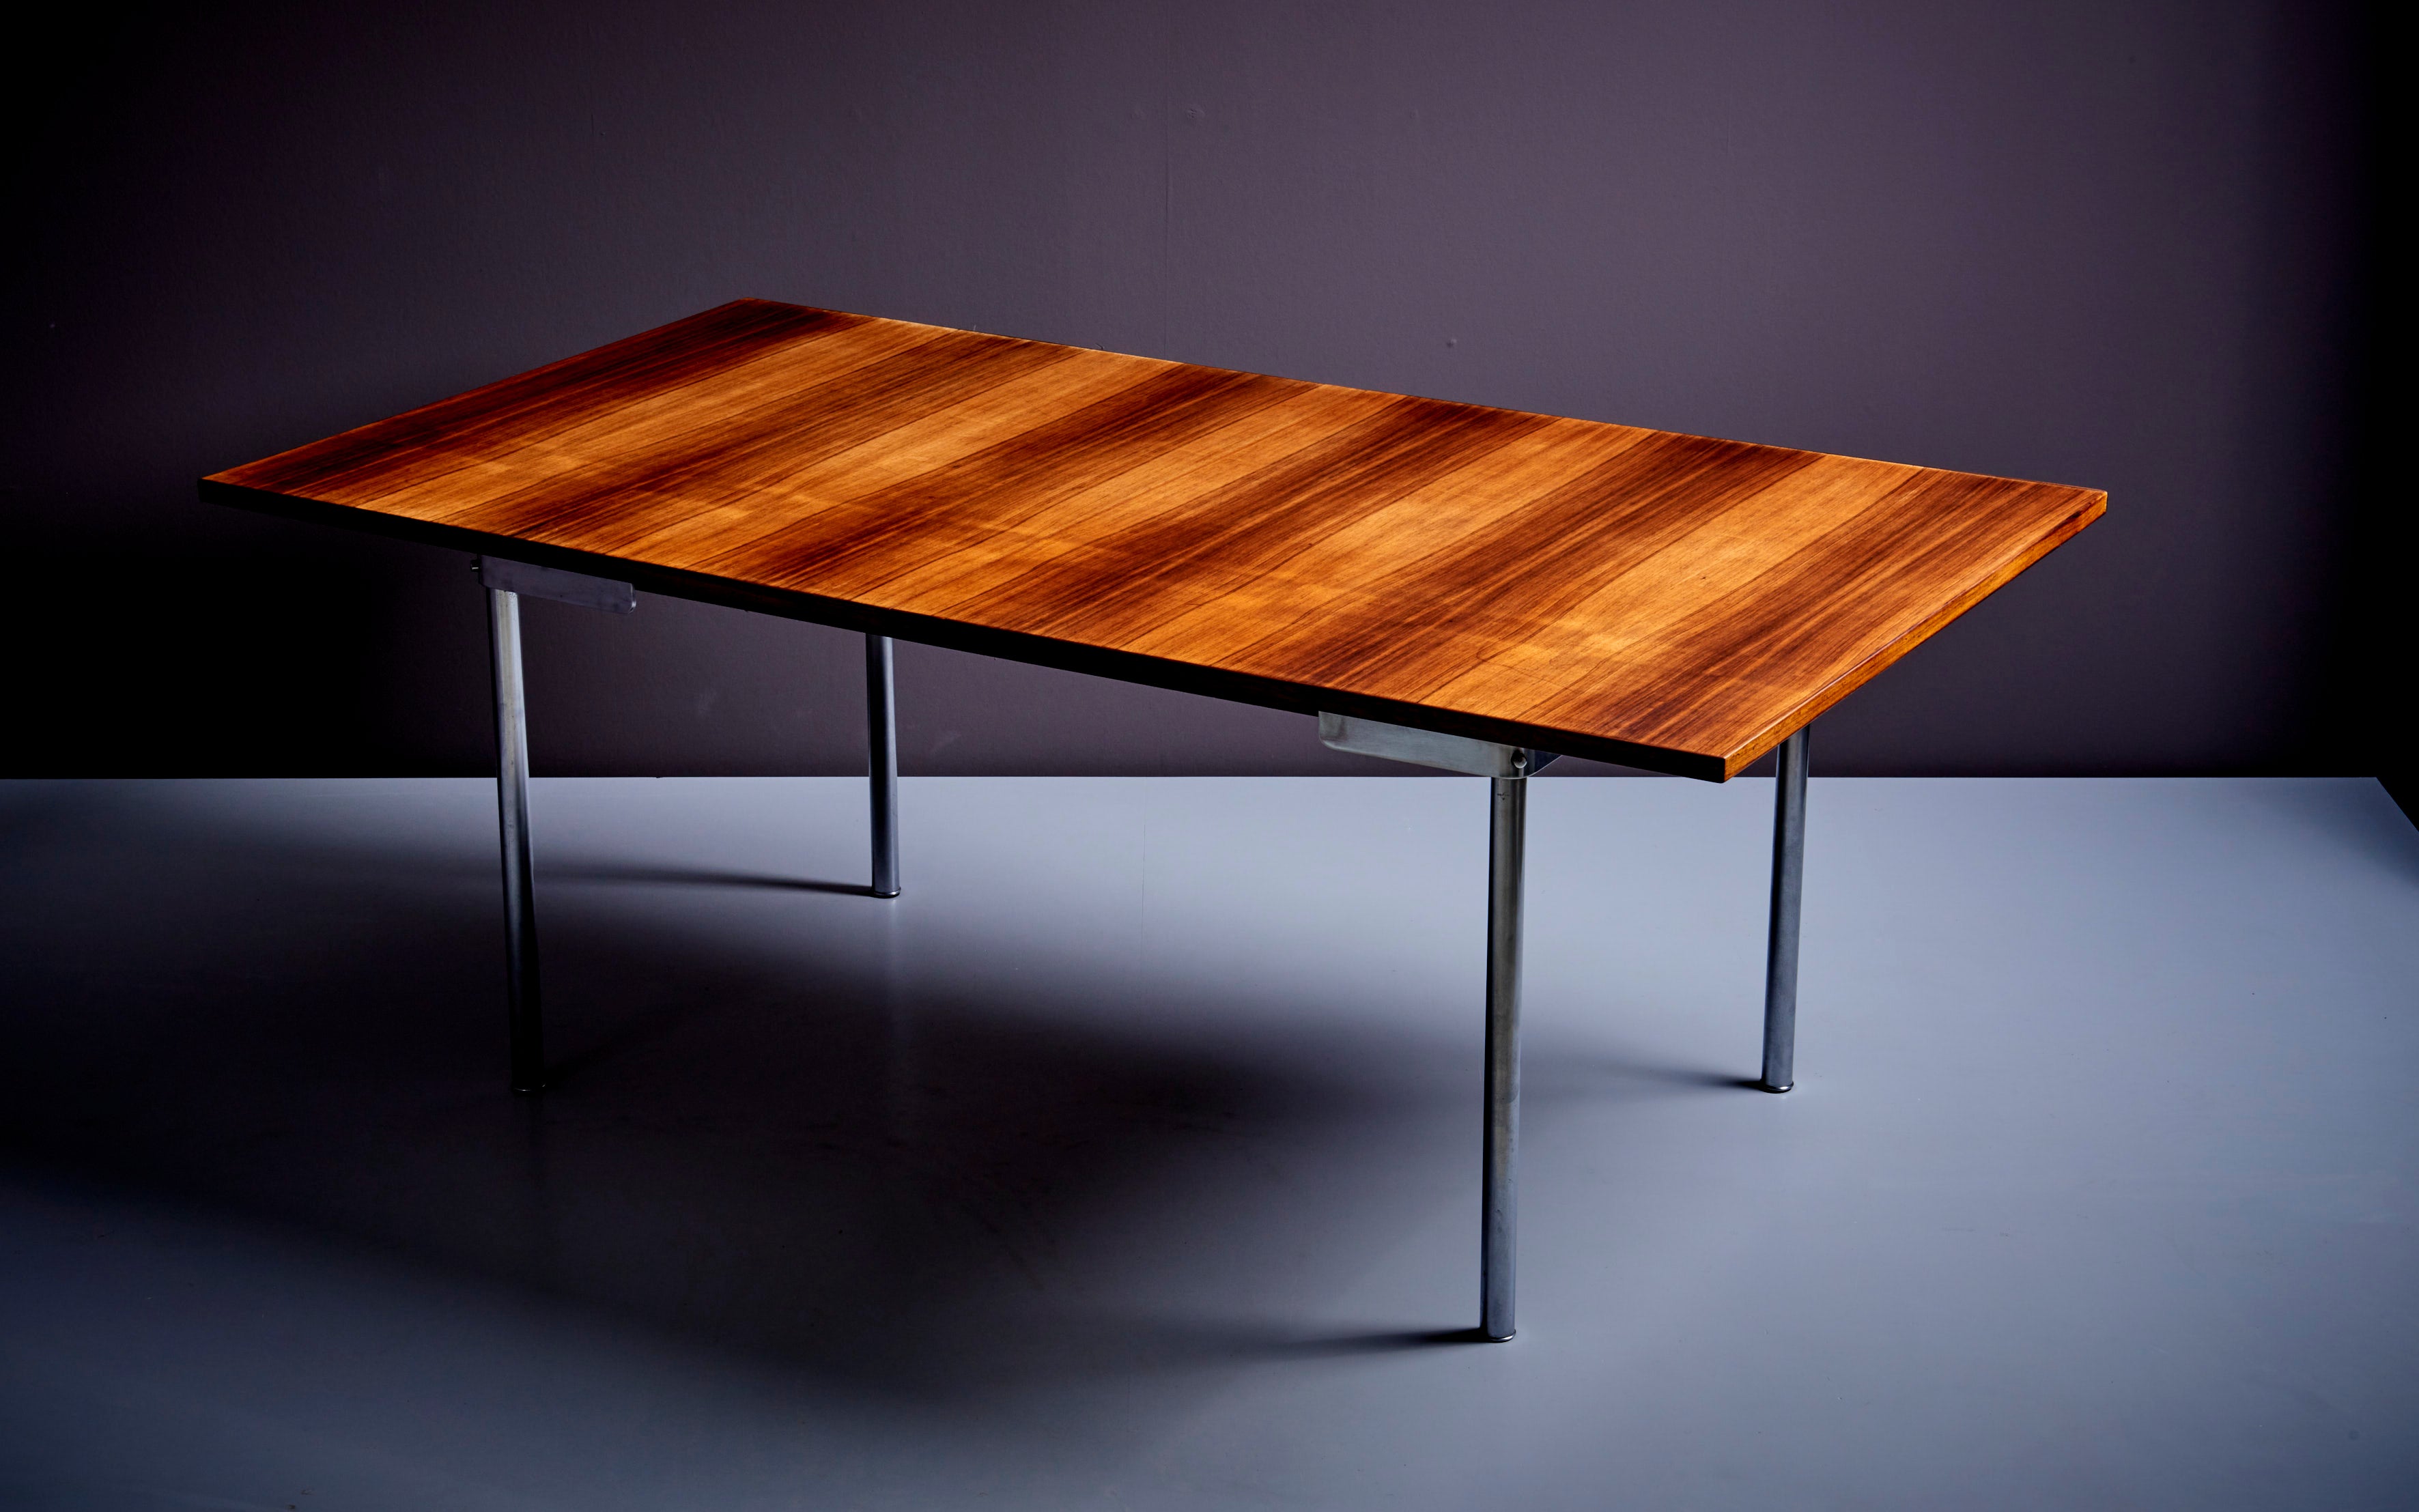 Large dining table designed by Hans Wegner and manufactured in Denmark. Beautiful Rosewood top and elegant base with chromed legs. The table can be extended up to a width of 260cm. 

Hans Wegner (1914-2007) was a Danish furniture designer who is